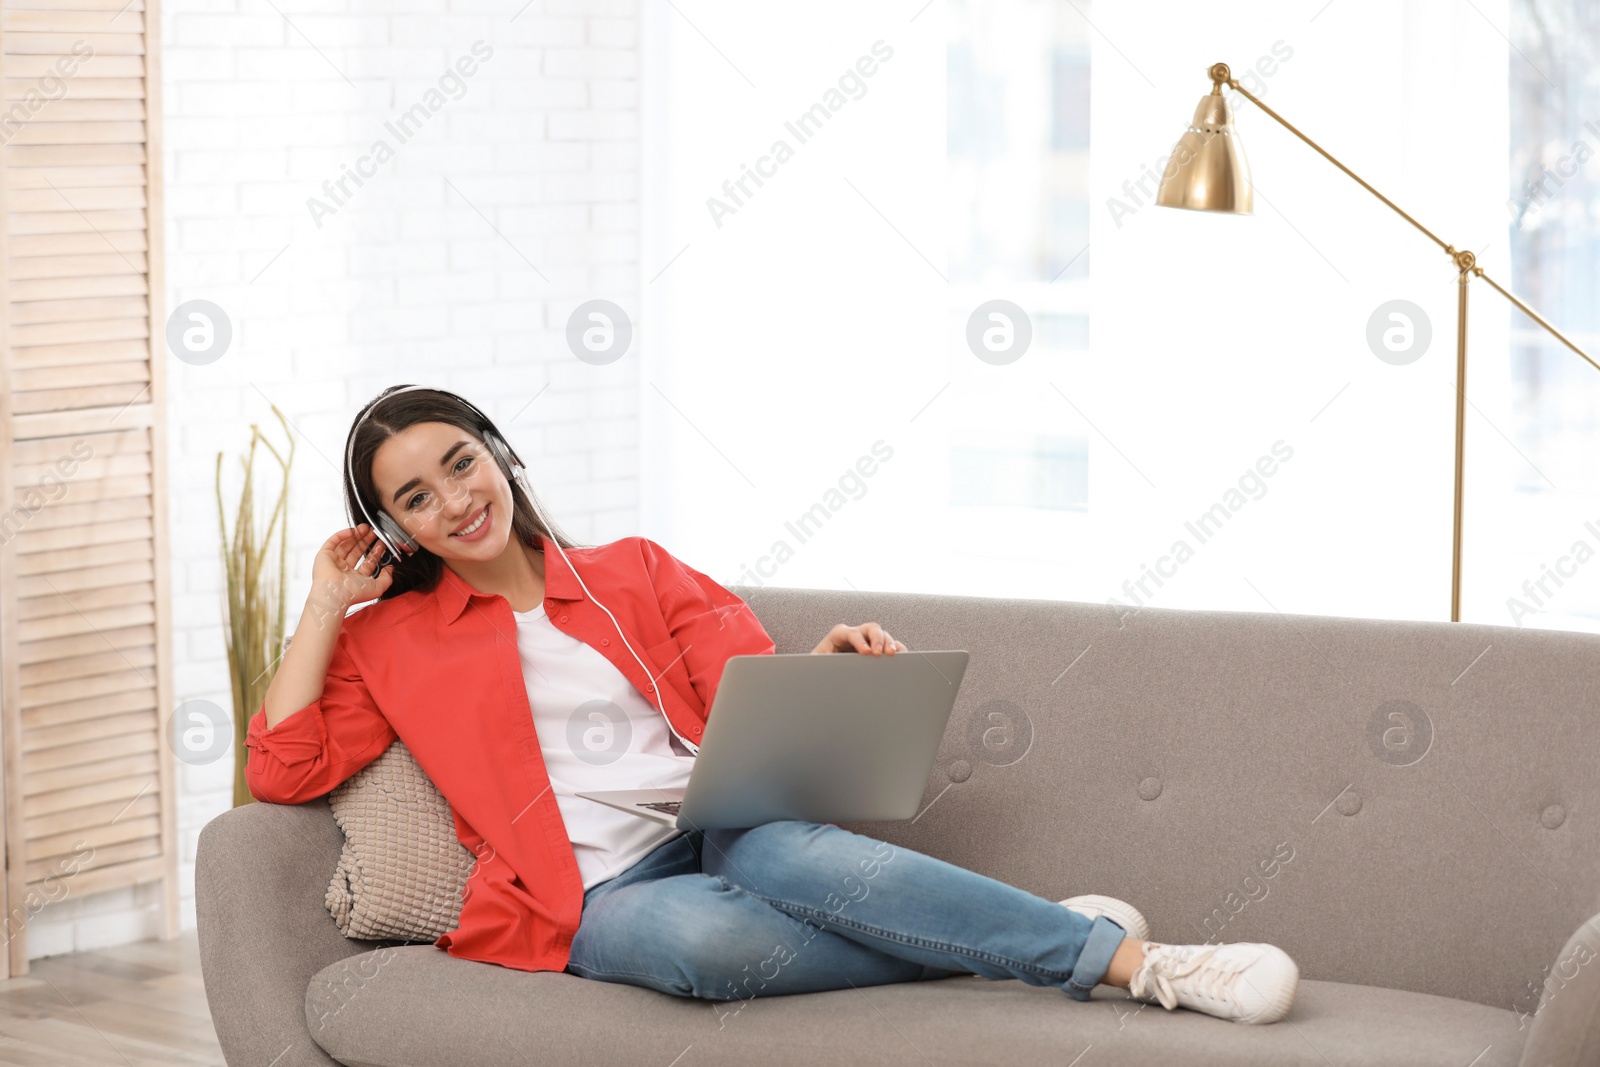 Photo of Young woman with headphones and laptop on sofa in living room